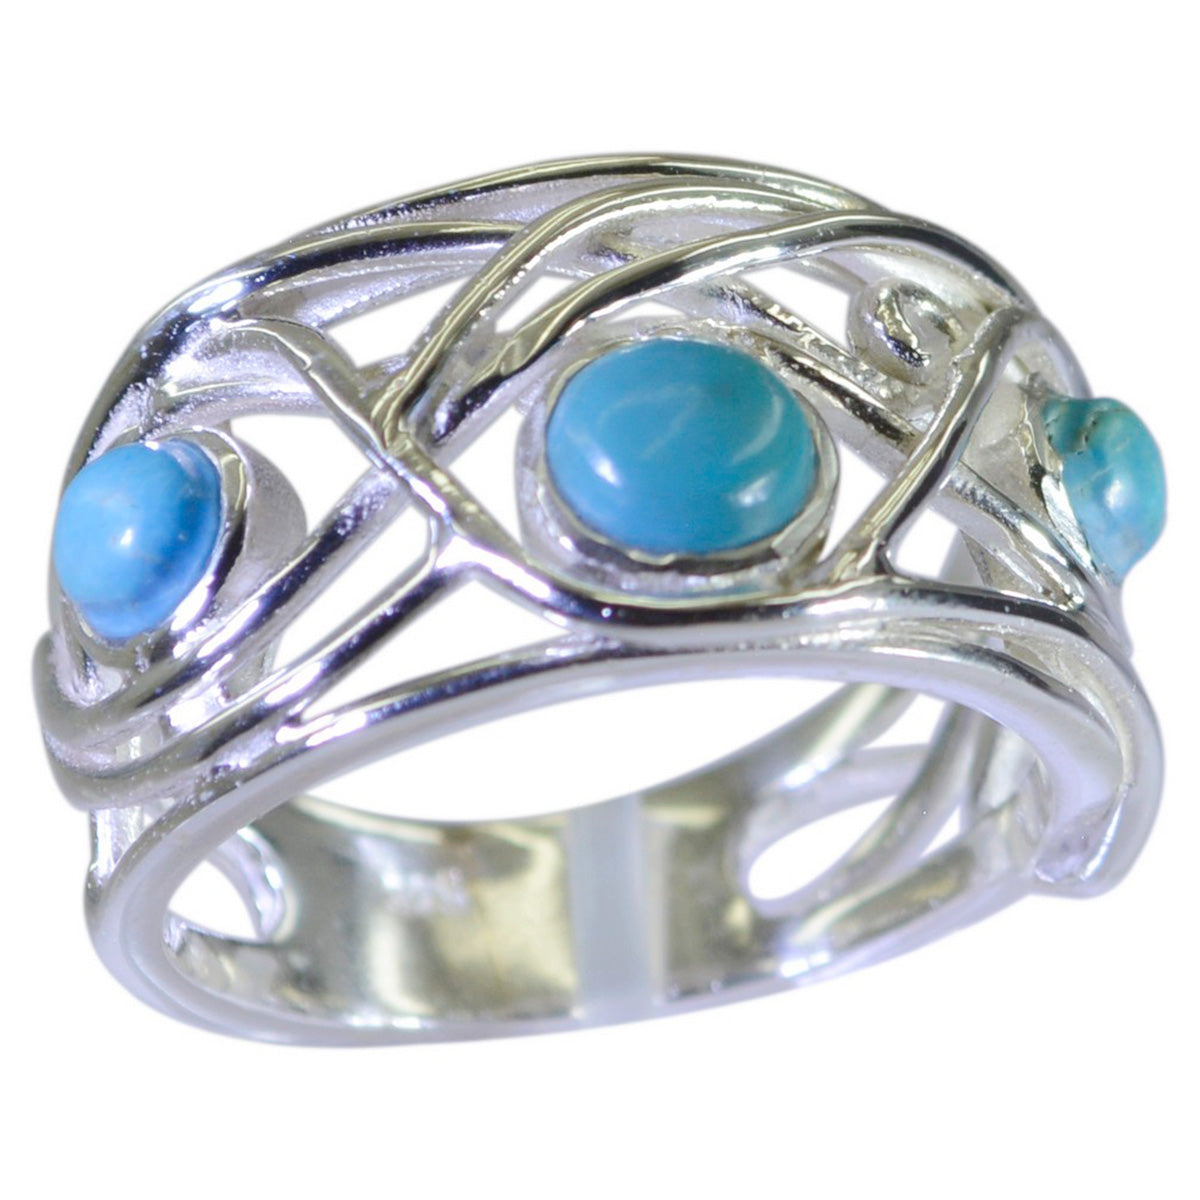 Cute Gem Turquoise 925 Sterling Silver Ring Pottery Barn Jewelry Box